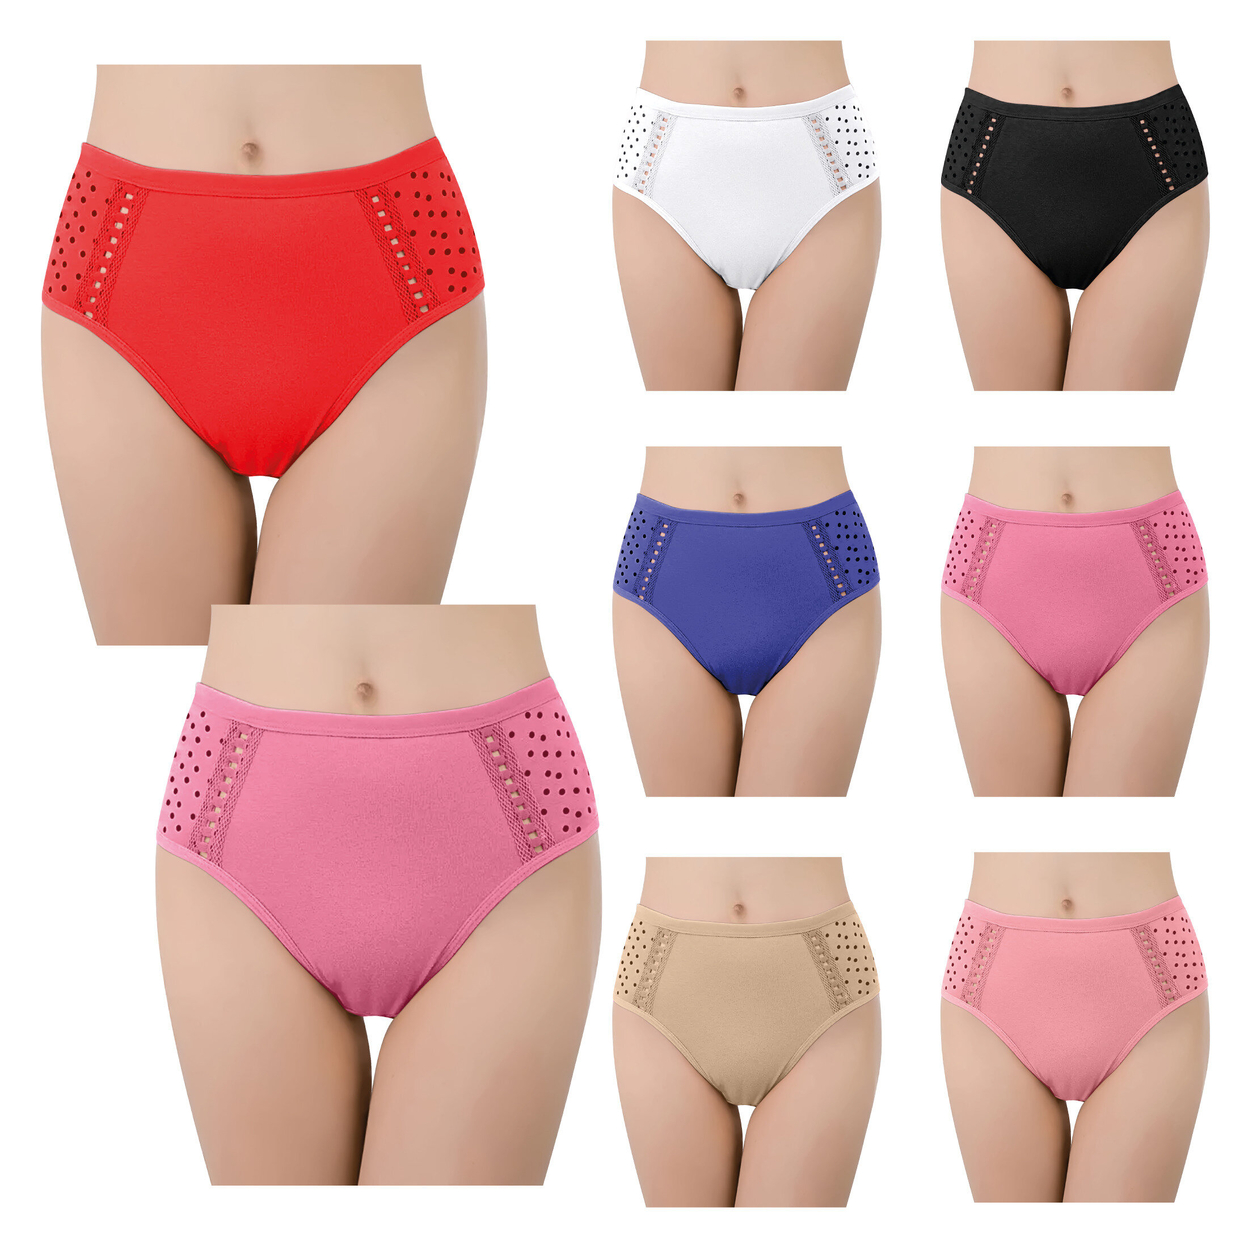 5-Pack: Women's Ultra Soft Moisture Wicking Panties Cotton Perfect Fit Underwear (Plus Sizes Available) - Small